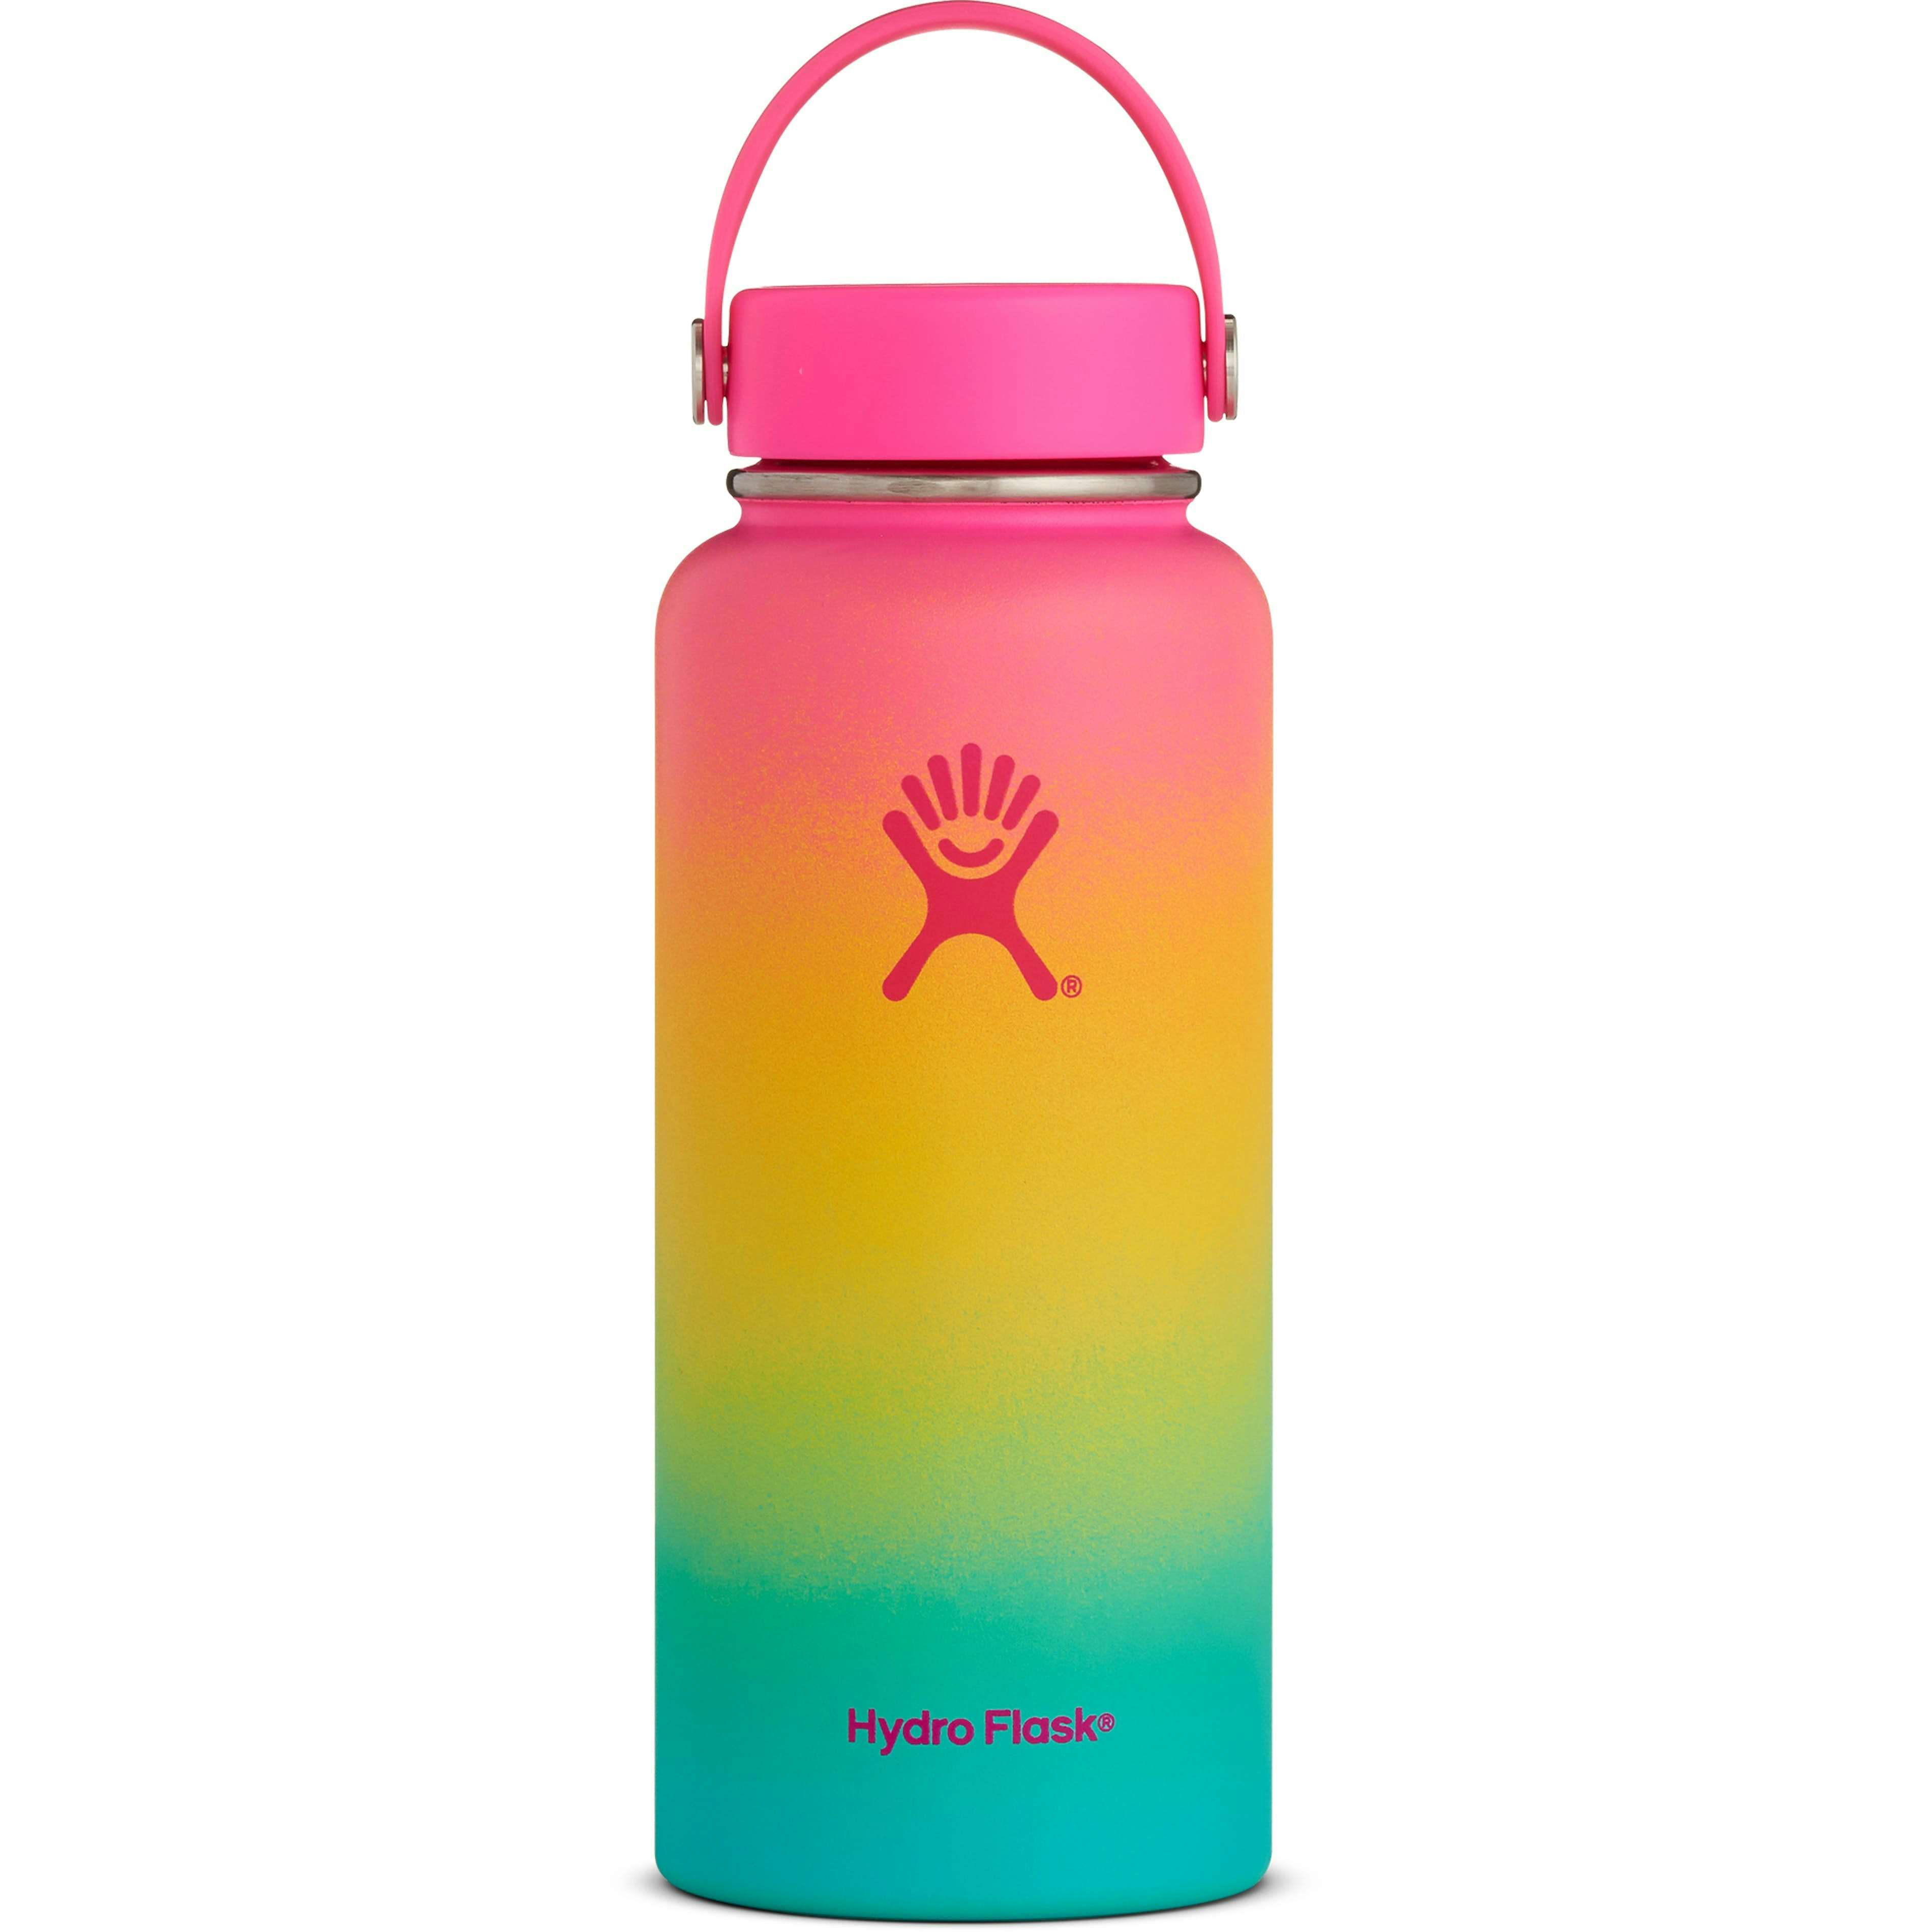 Hydroflask water bottle in rainbow colour